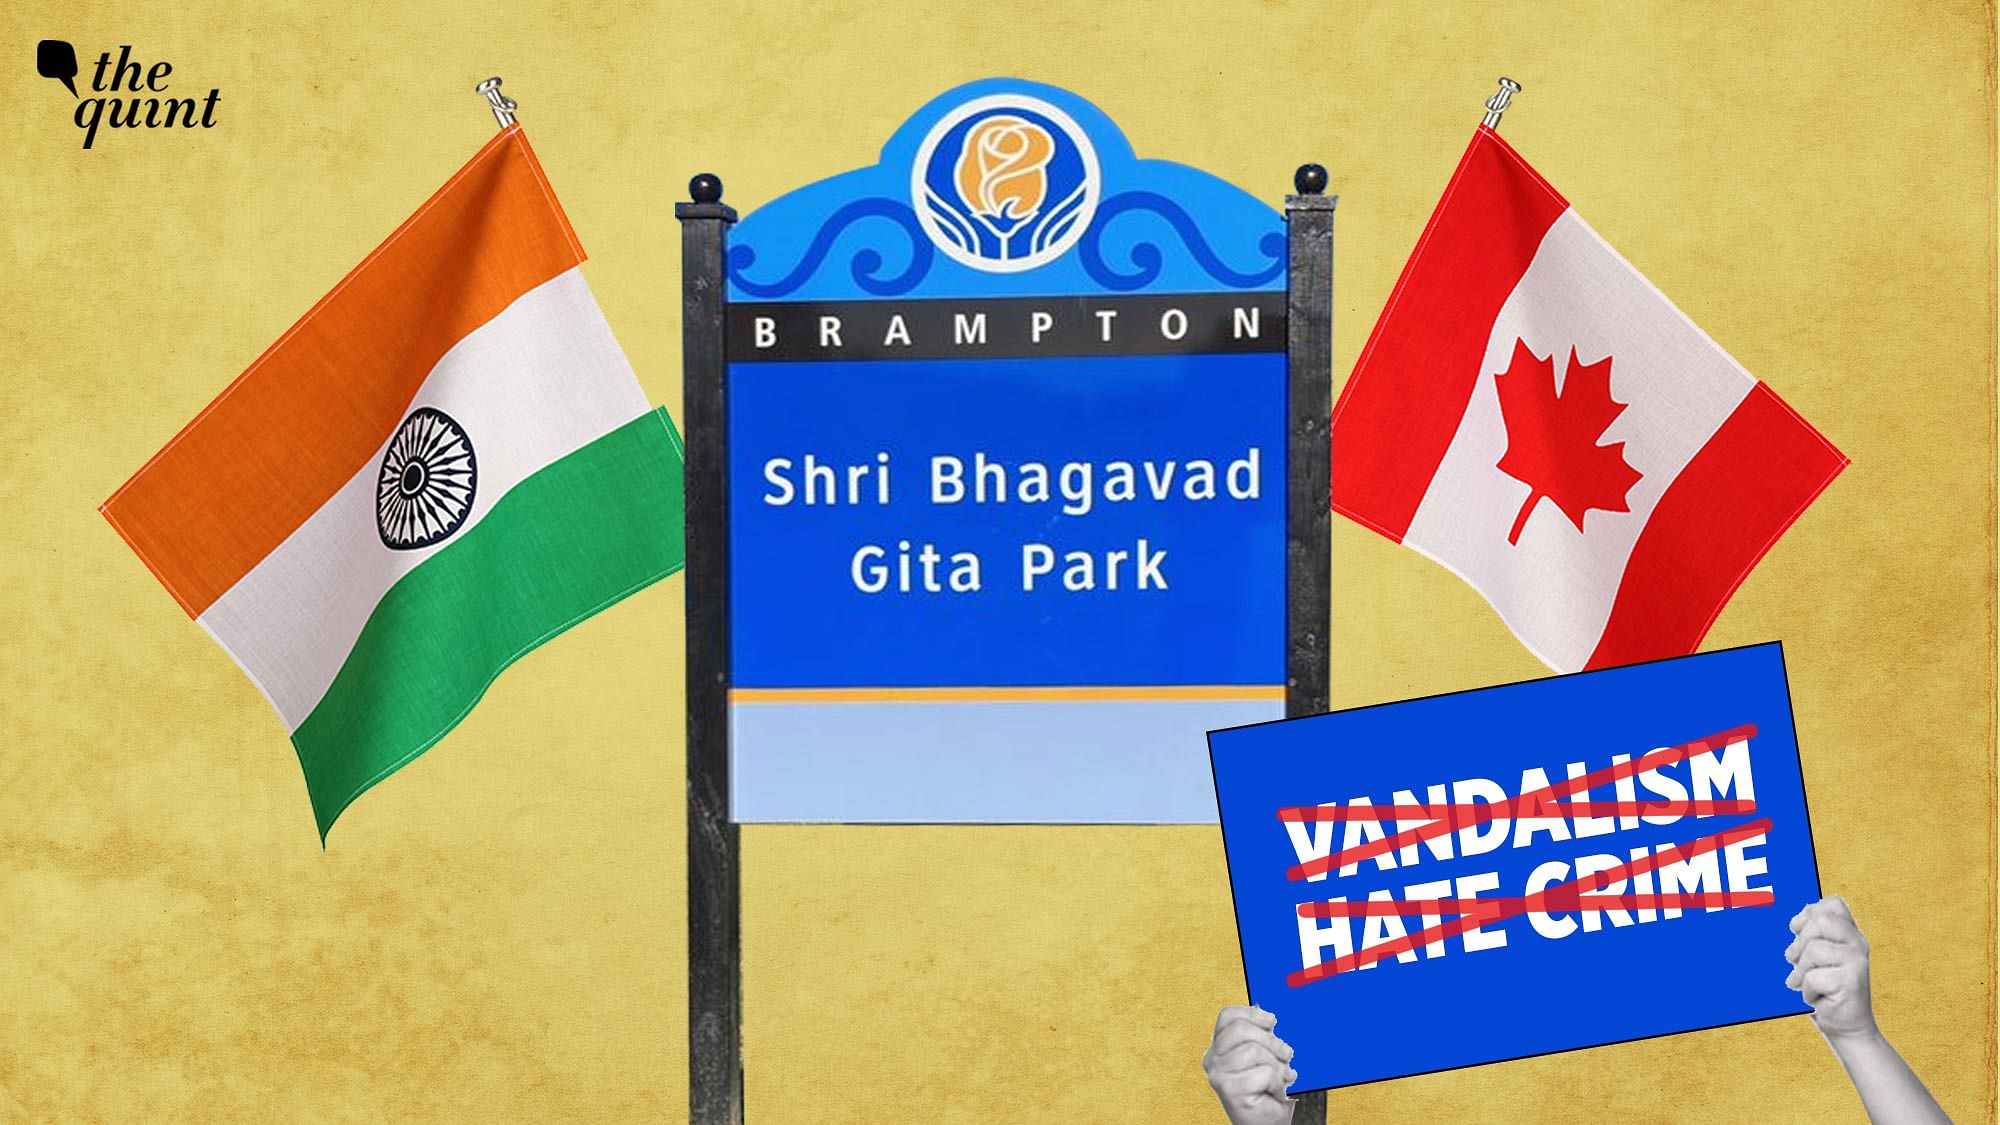 <div class="paragraphs"><p>The claims of vandalism at the Shri Bhagavad Gita Park in Brampton, Canada, were debunked by the locals and the police.&nbsp;</p></div>